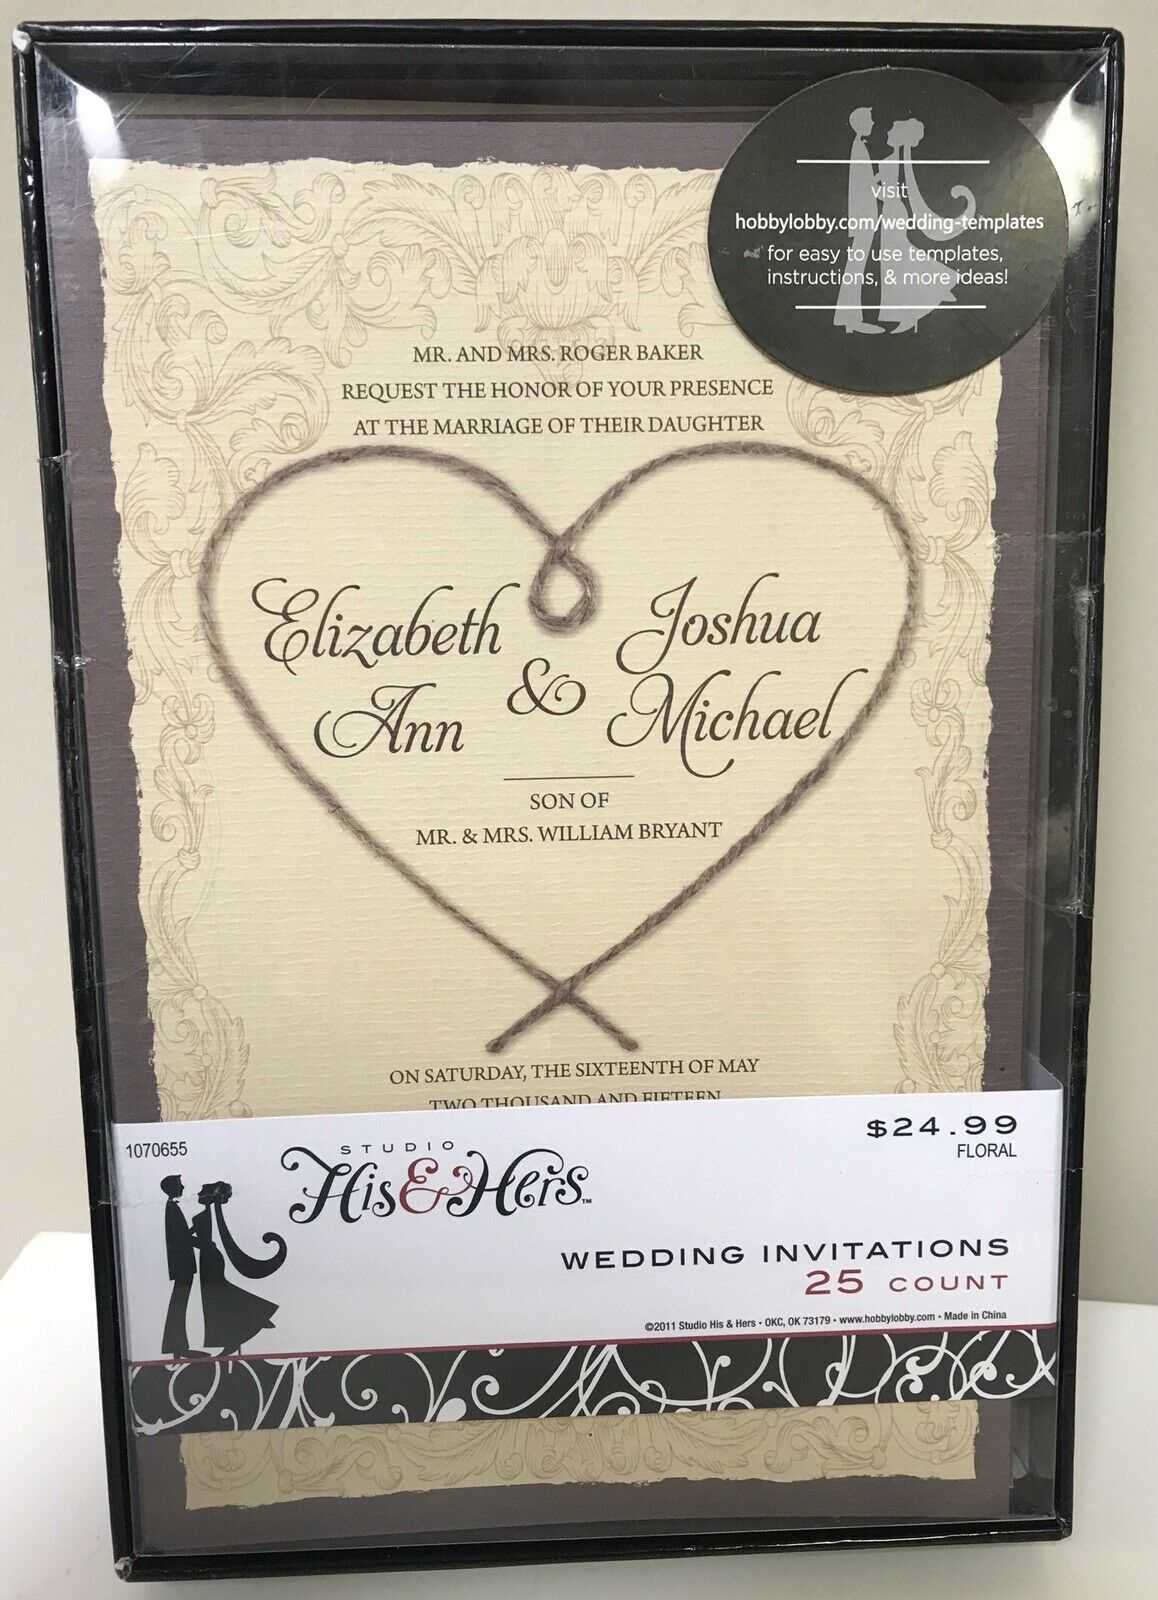 His & Hers 25 Printable Hobby Lobby Invitations Craft Brown Heart Pattern  Nib Inside Amscan Imprintable Place Card Template